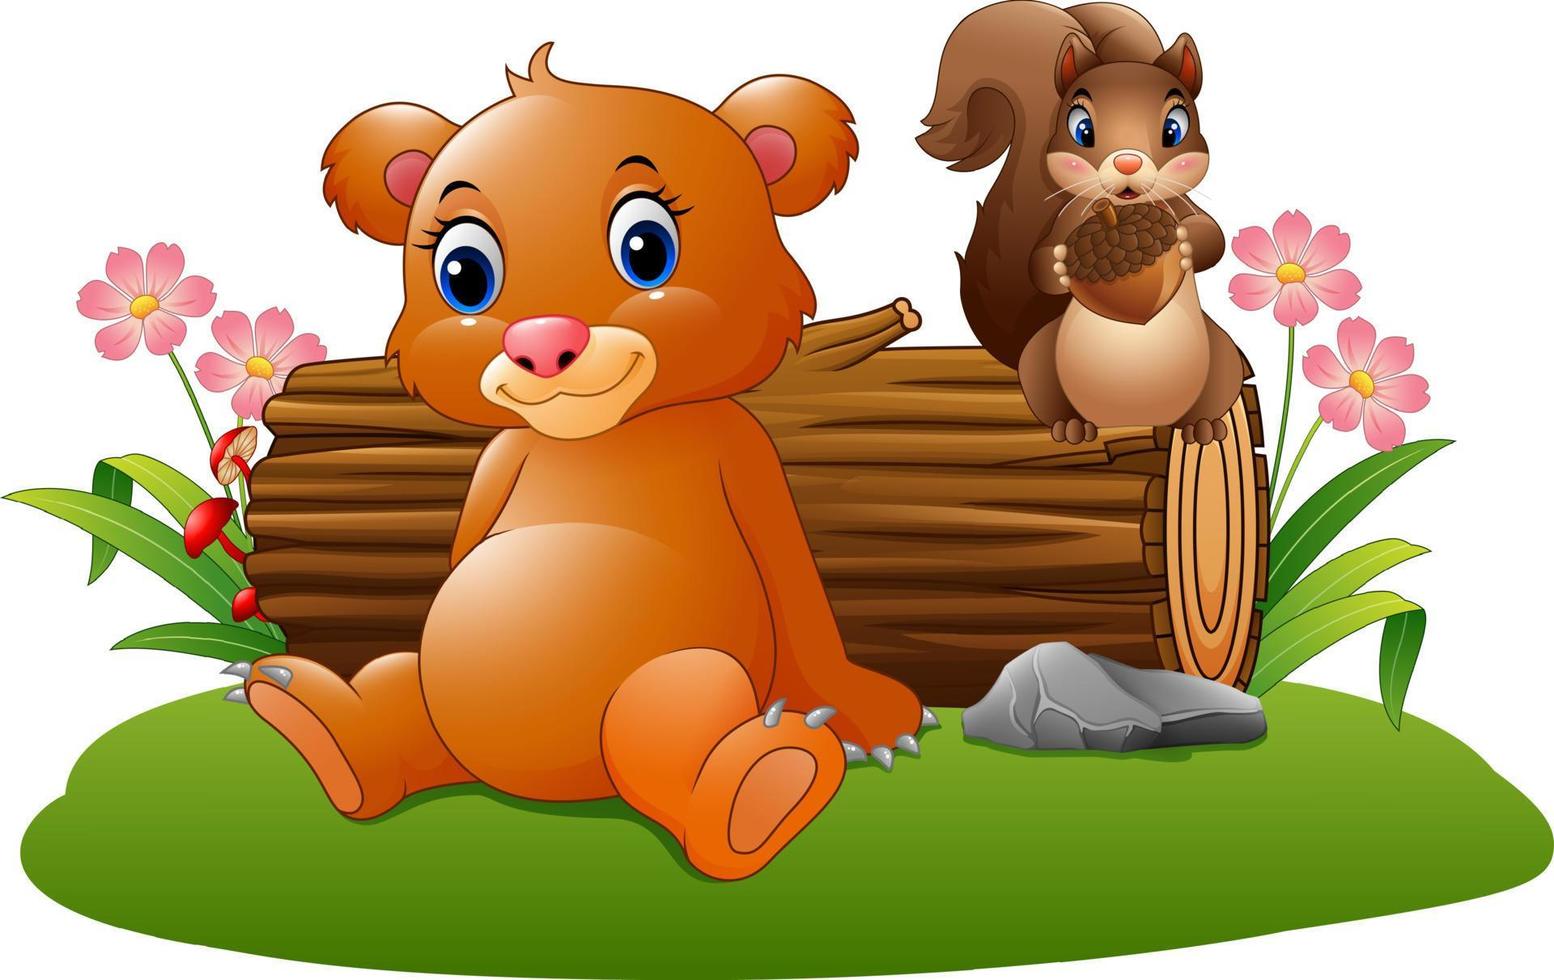 Cartoon brown bear with squirrel in the forest vector